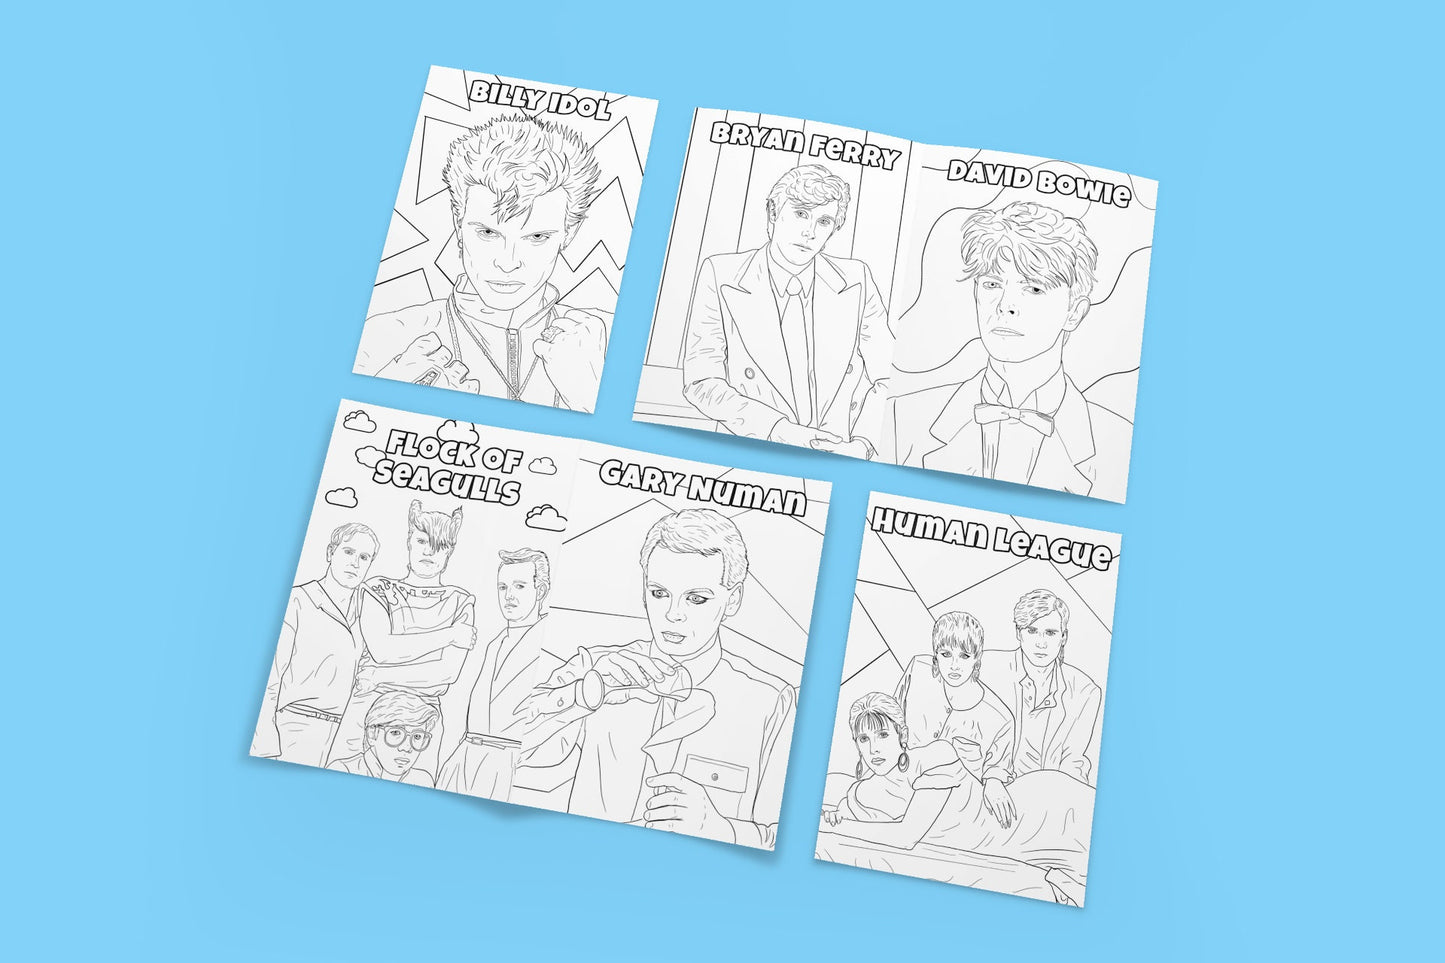 New wave colouring postcards, set of 10, music postcard, gift for new wave music fans, David Bowie, Bryan Ferry, Gary Numan, Devo, and more